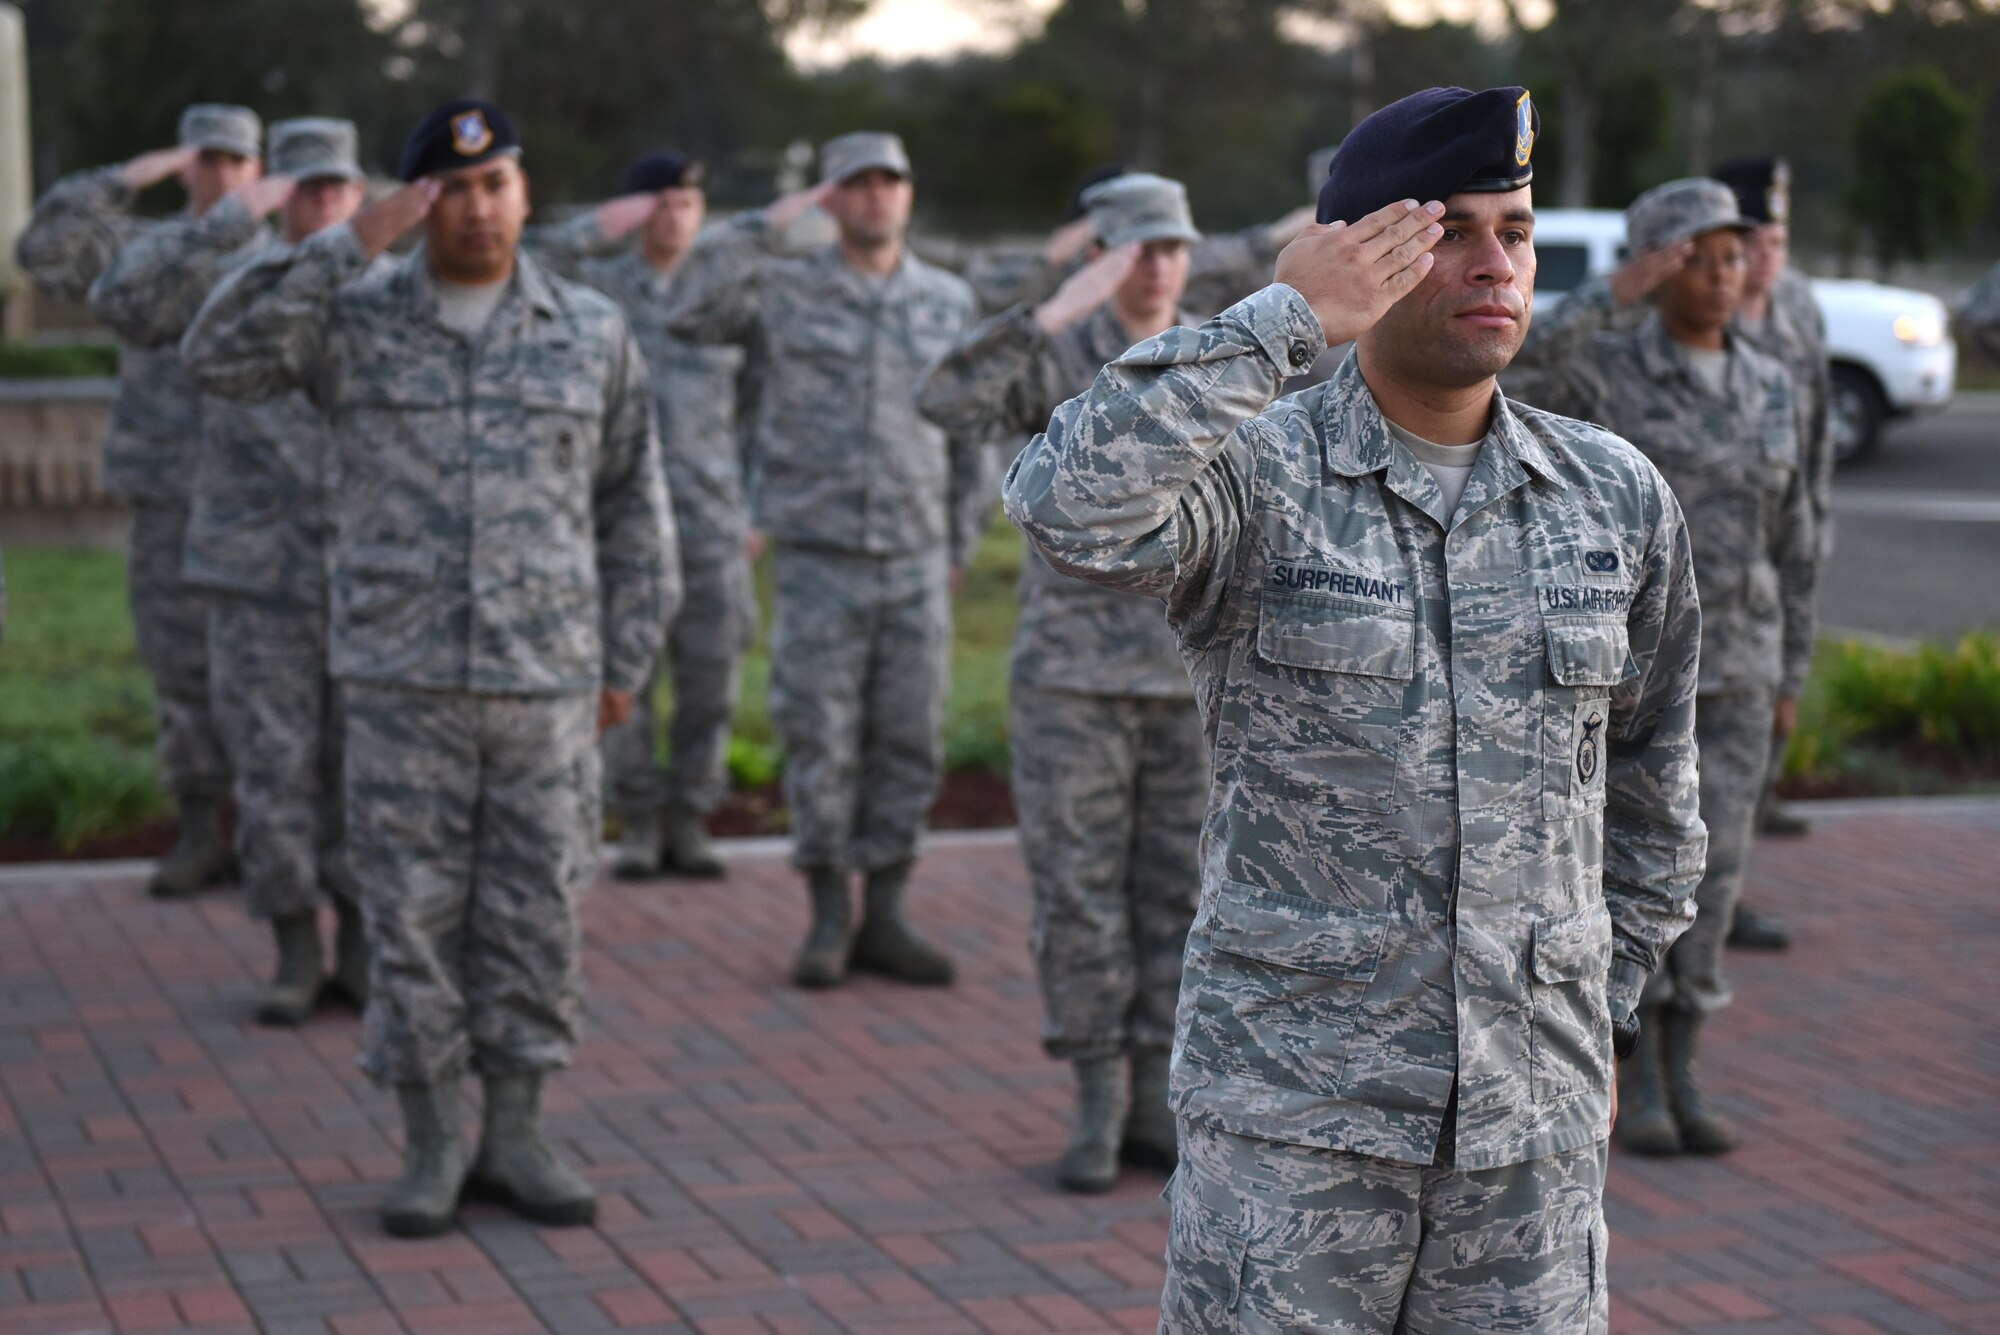 Members of Airman Leadership School Class 17-Alpha salute during Reveille, Oct. 25, 2016, Vandenberg Air Force Base, Calif. During their time in ALS, students embark on a 192-hour, 24-day journey designed to develop leadership abilities, the profession of arms, and effective communication. (U.S. Air Force photo by Airman 1st Class Robert J. Volio/Released)